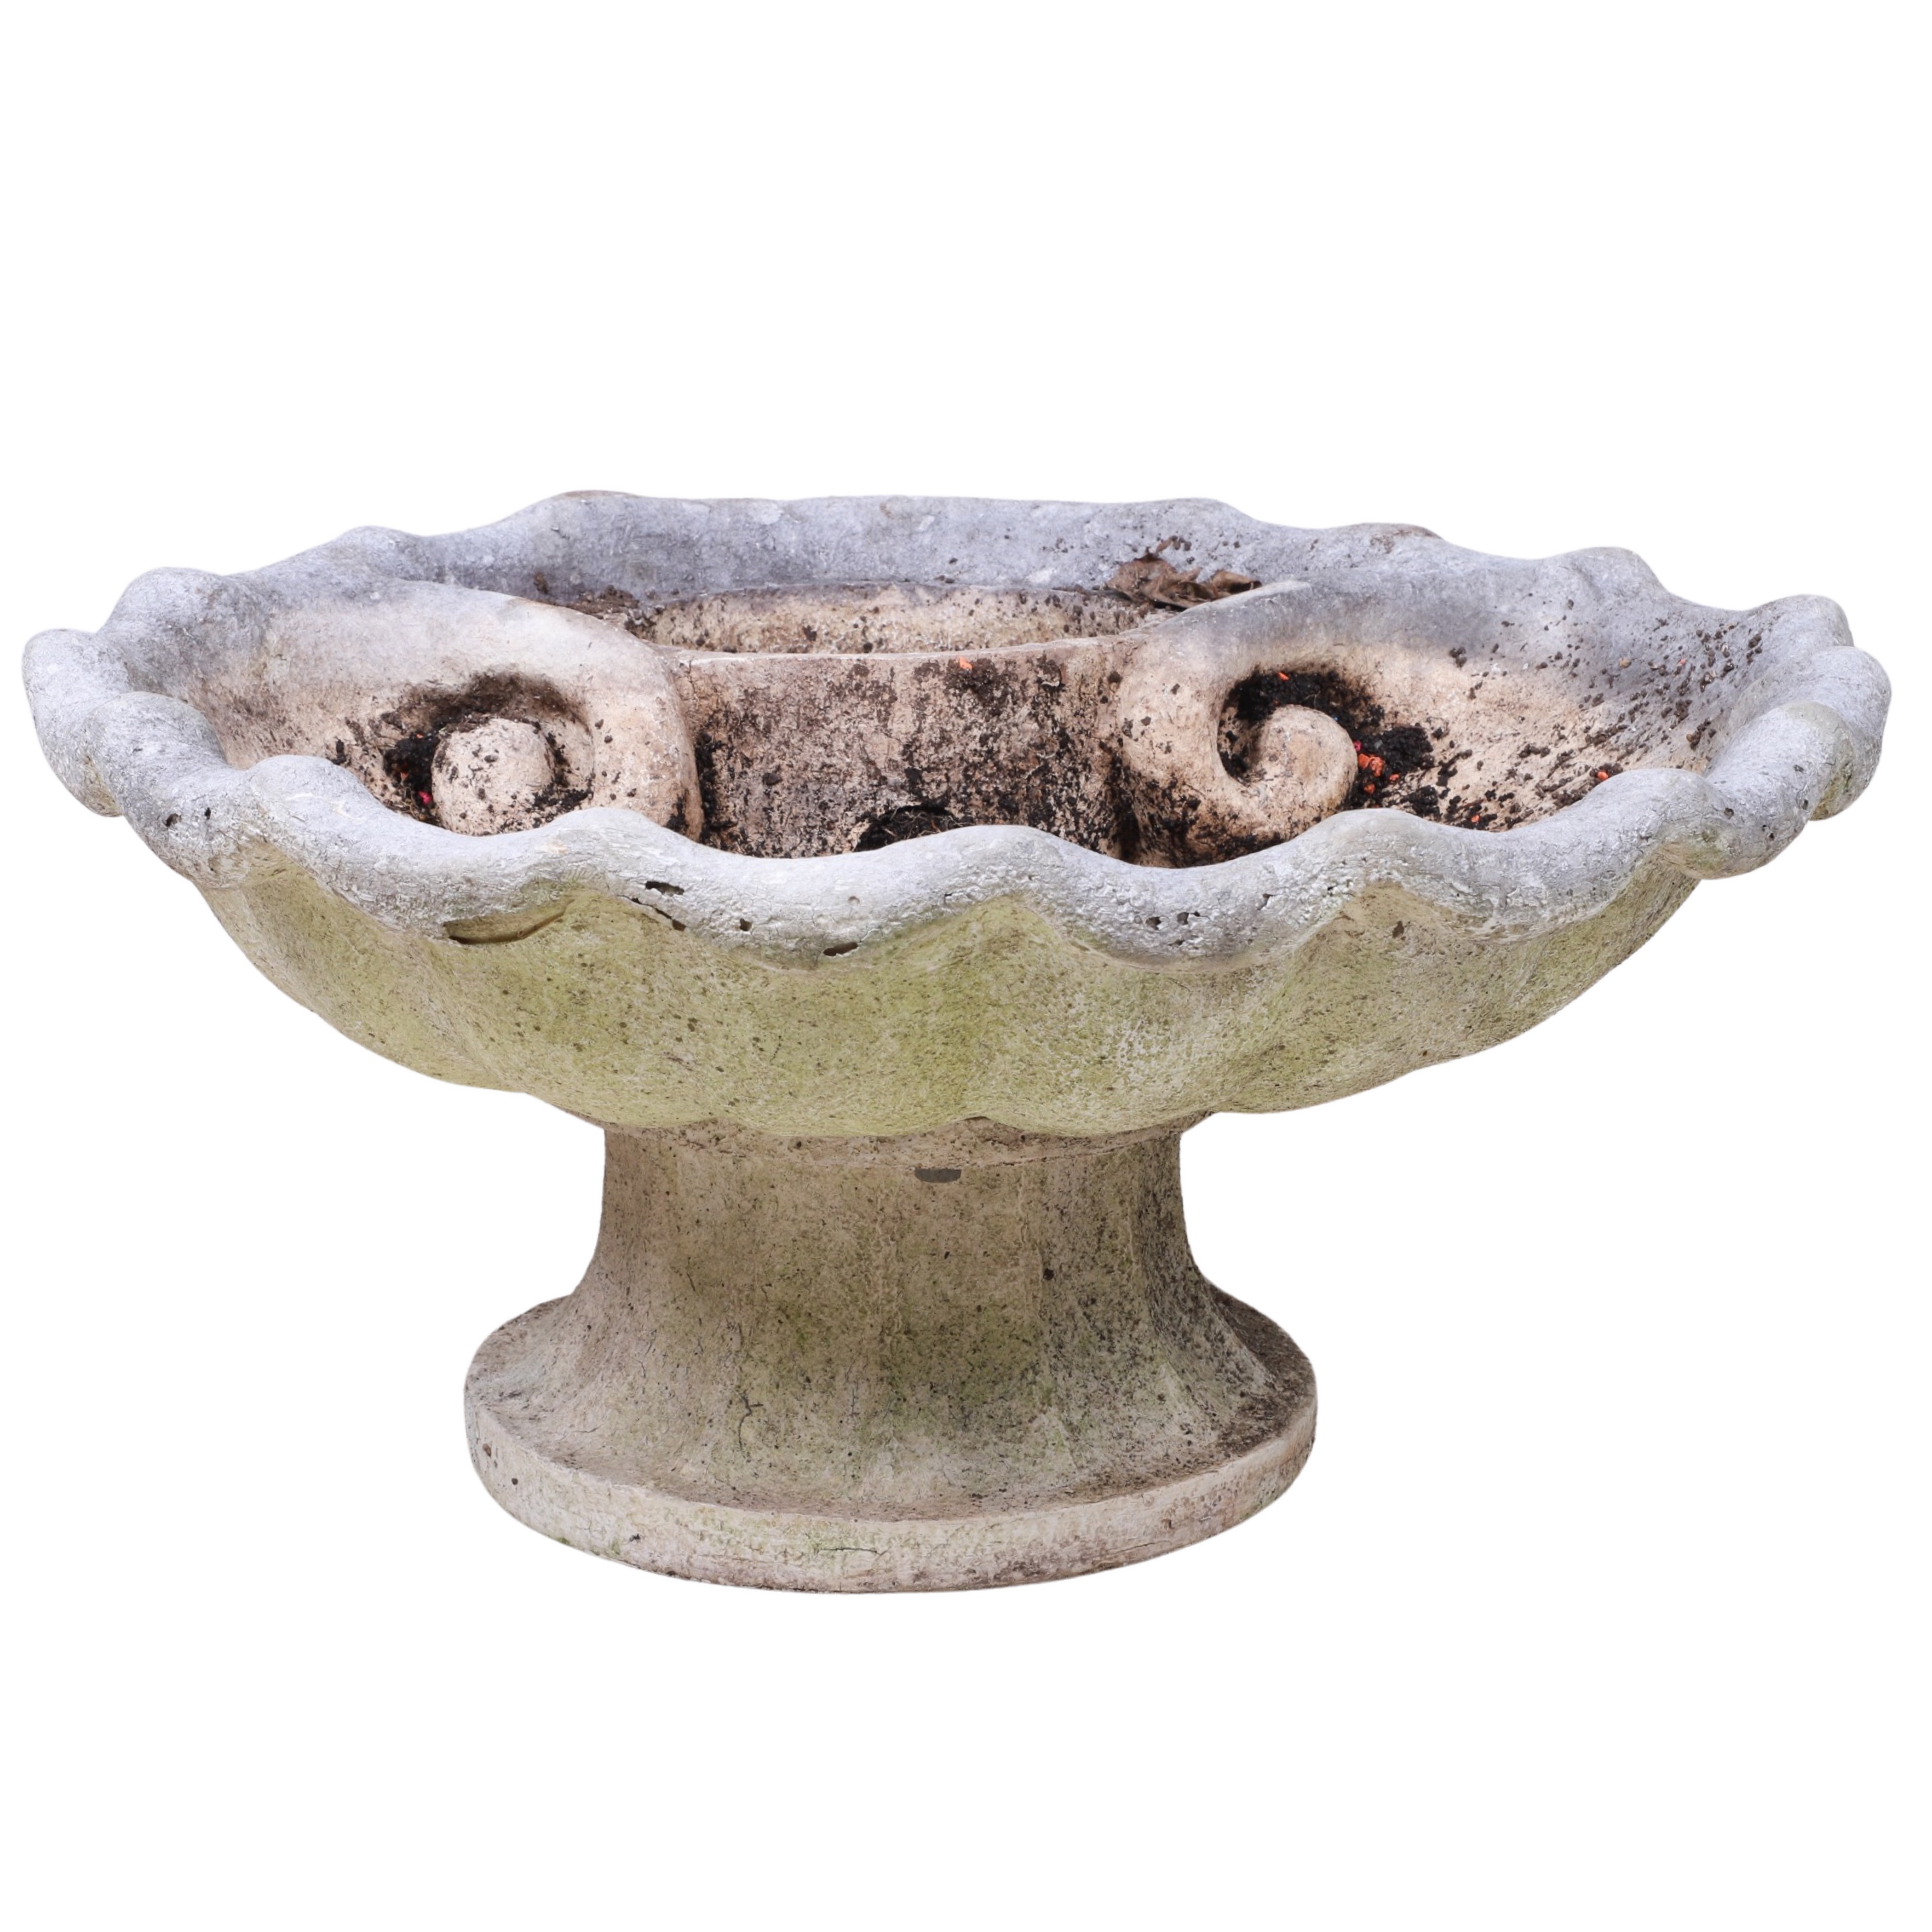 Cement shell form fountain, 12"h